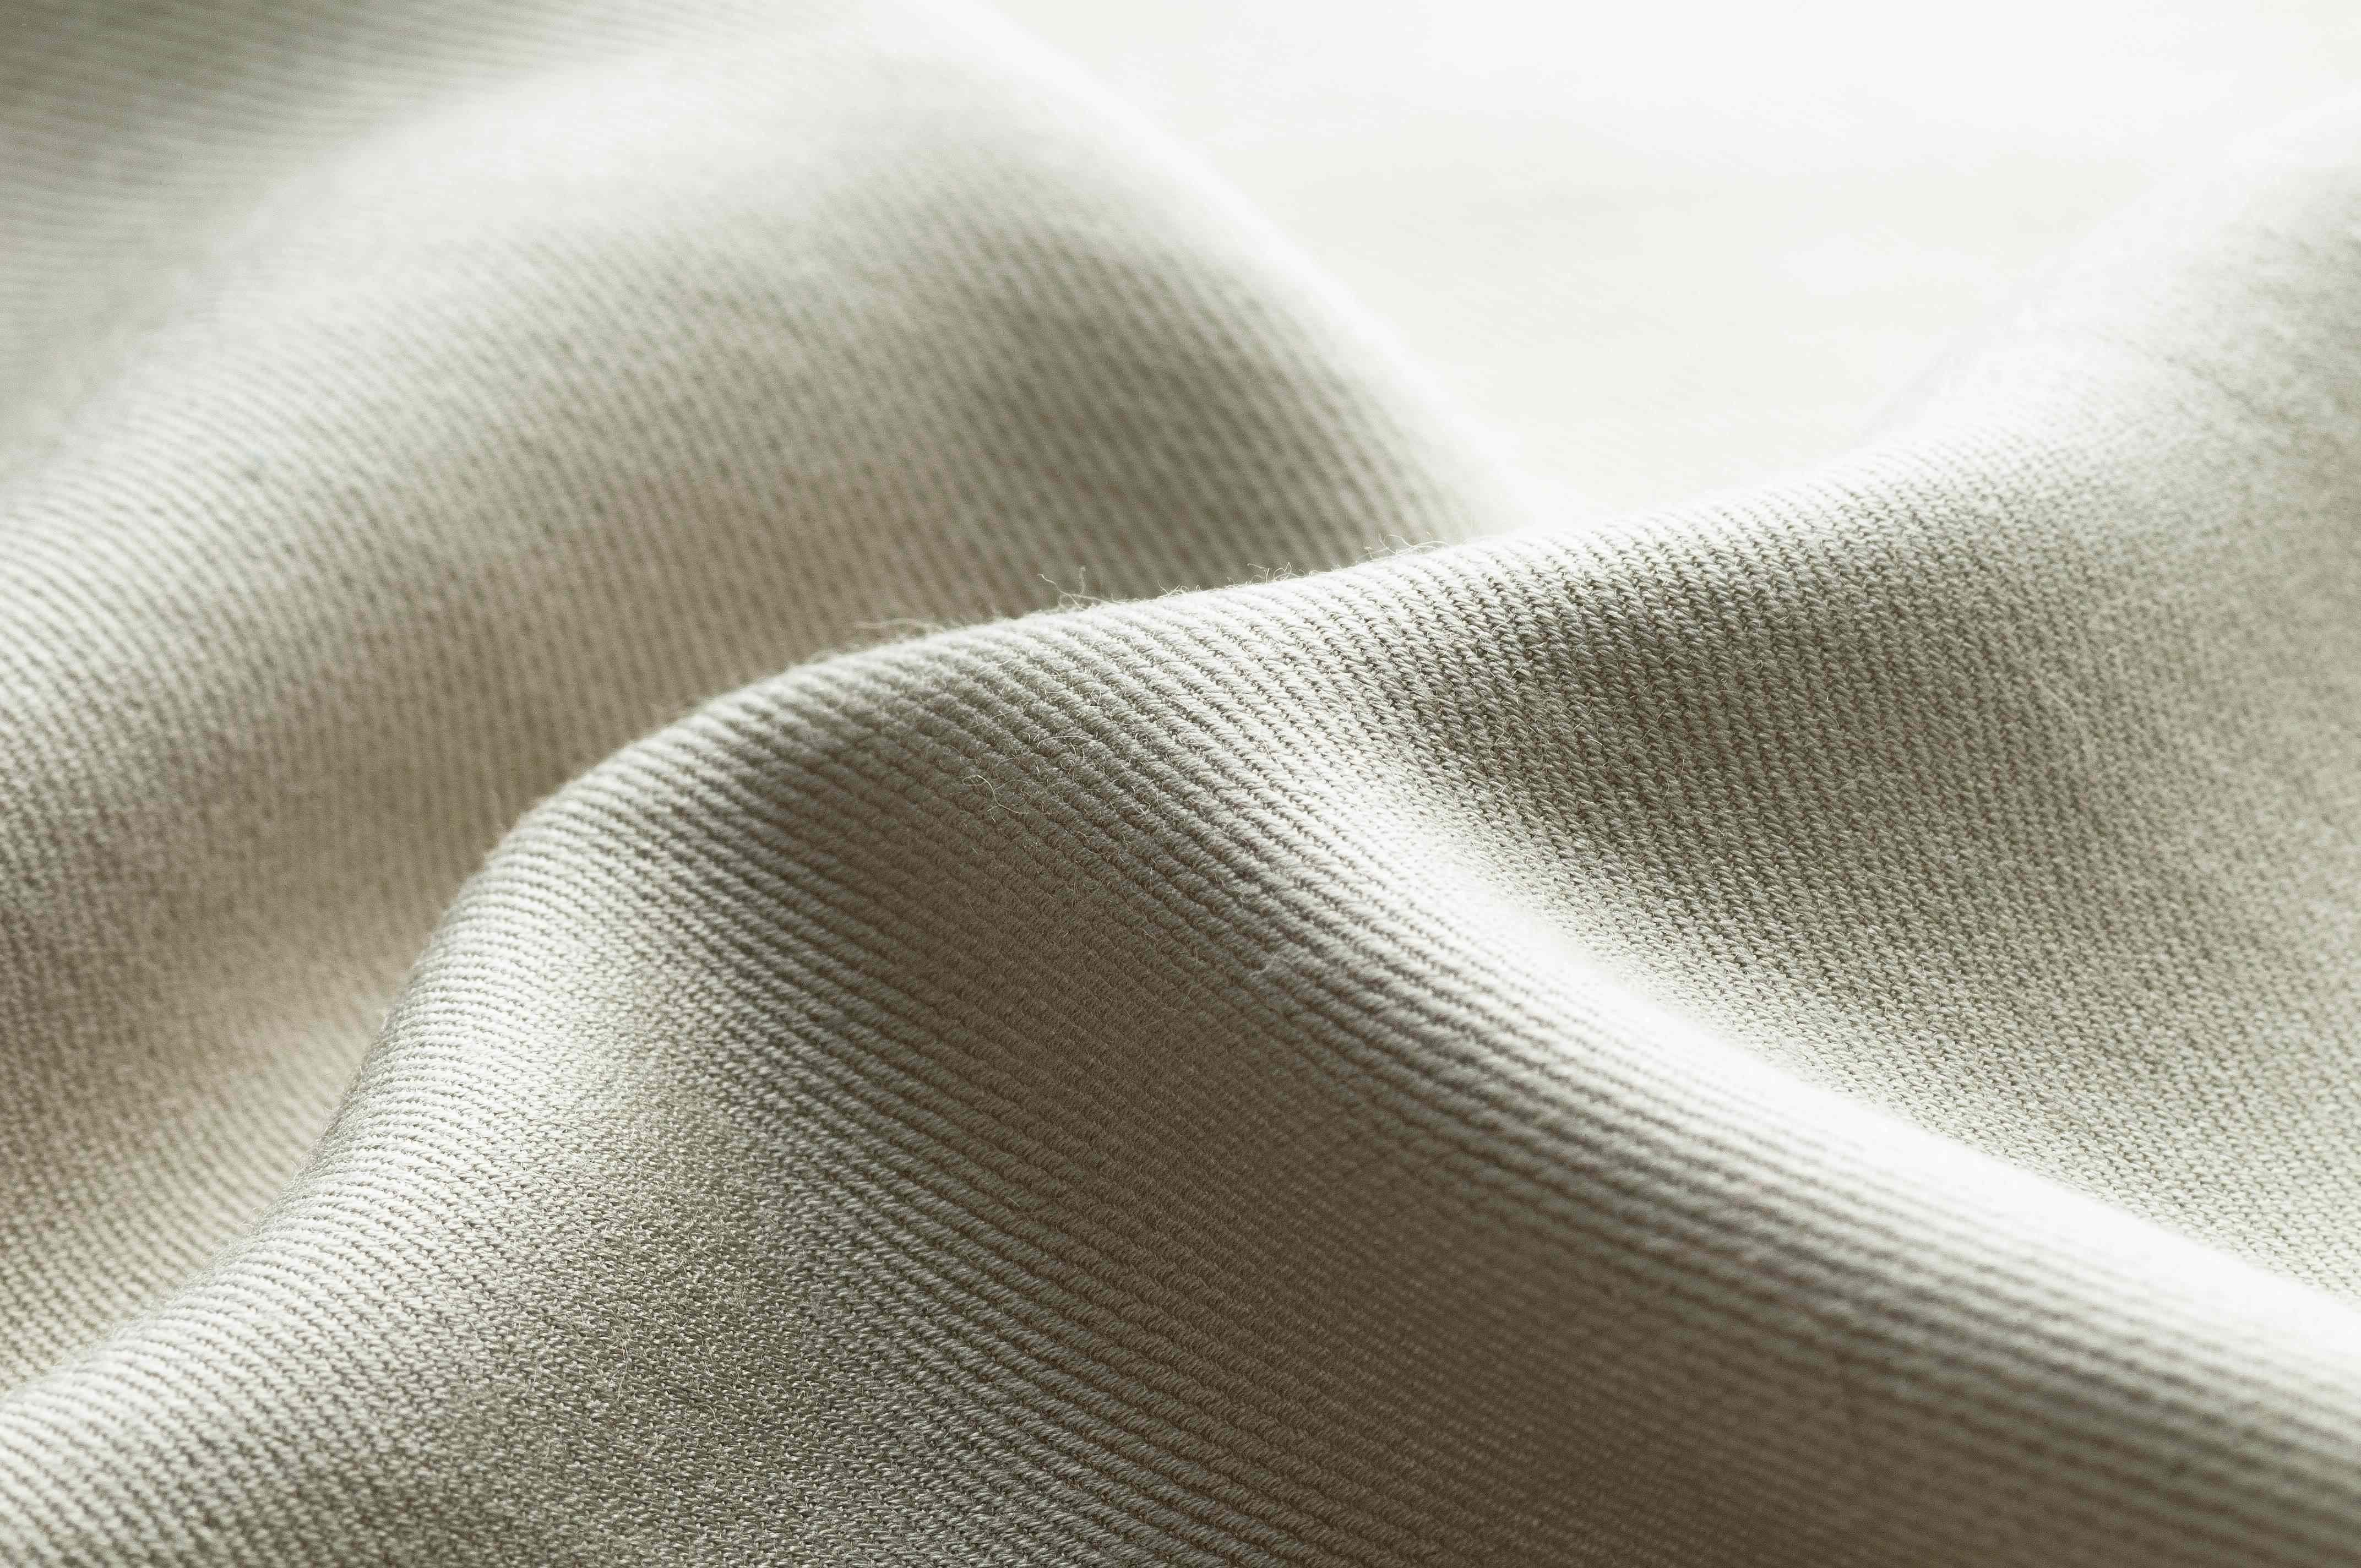 Seacell™-TUNG HO TEXTILE | Specialize in Functional Spun Yarn